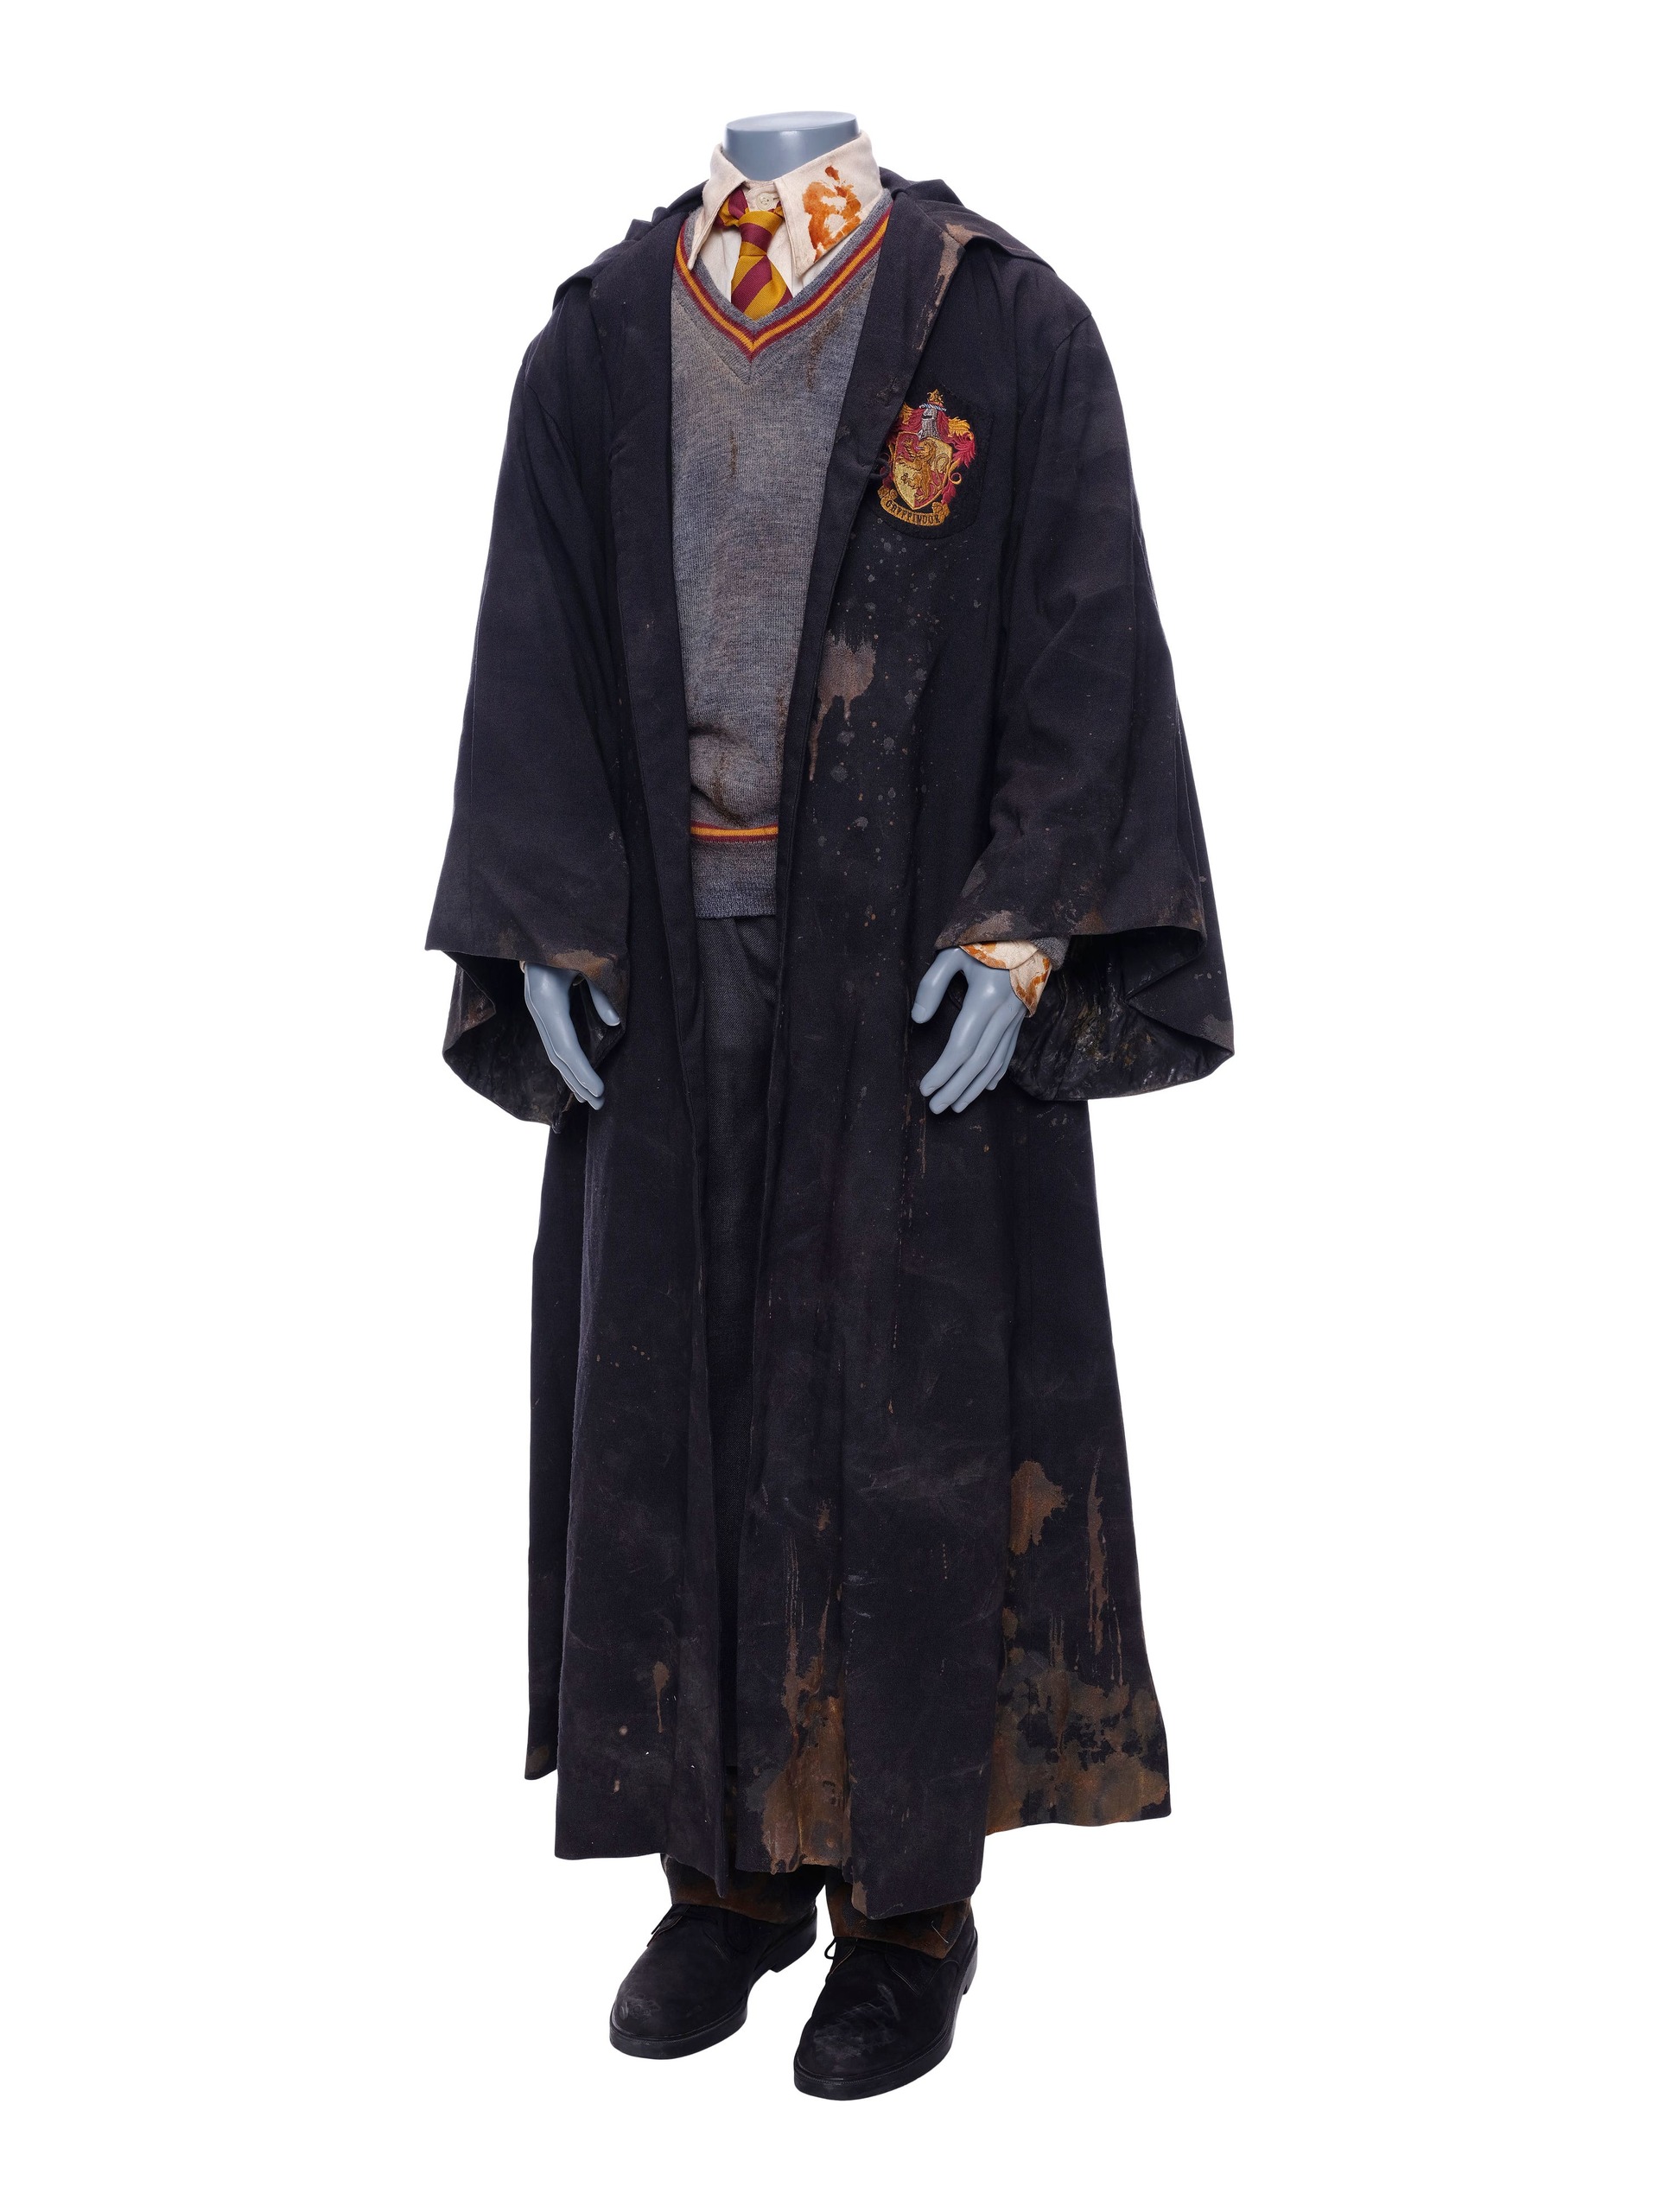 Harry Potter’s Costume with Glasses